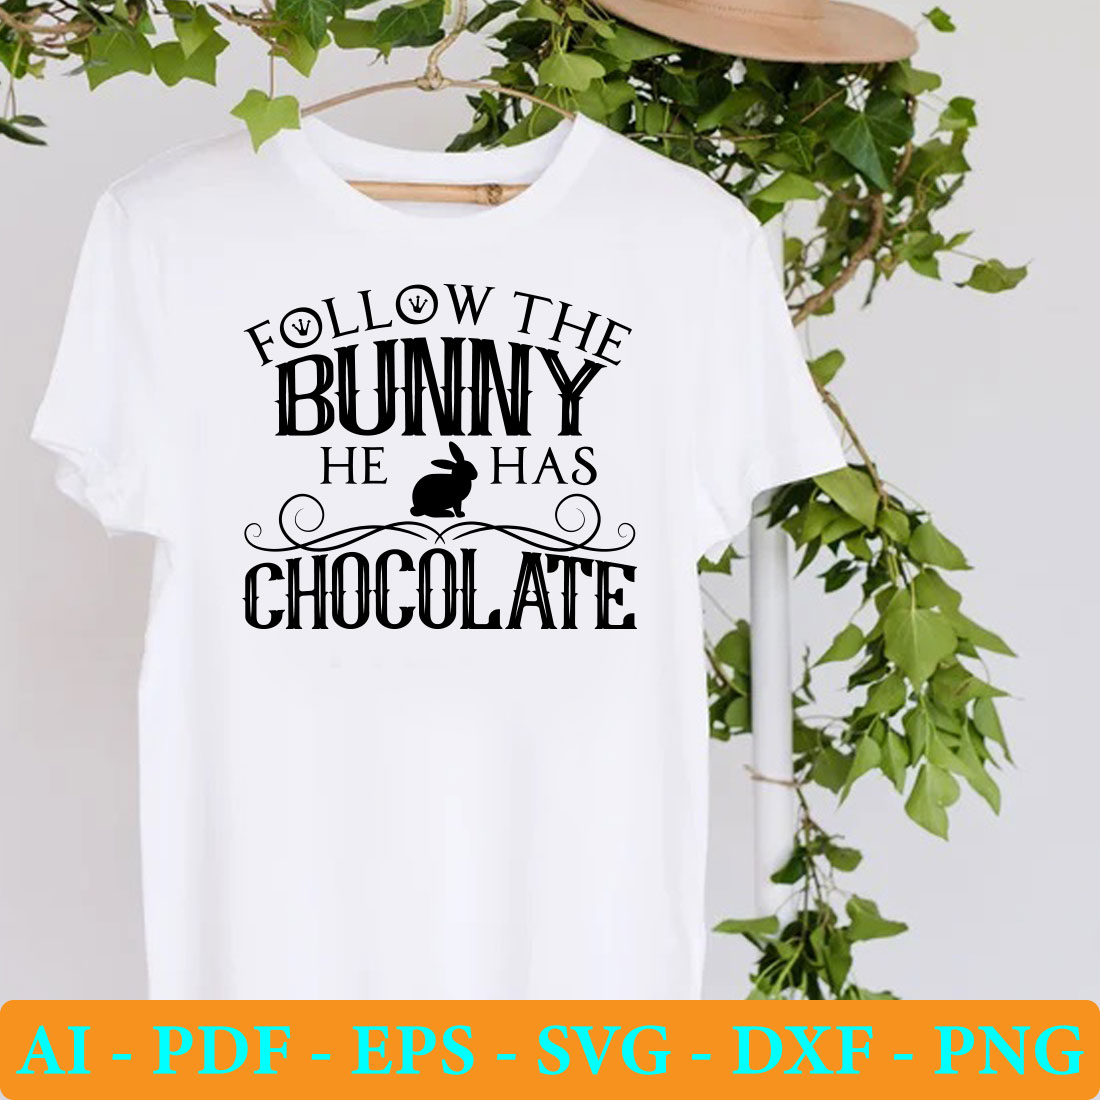 T - shirt that says follow the bunny he has chocolate.